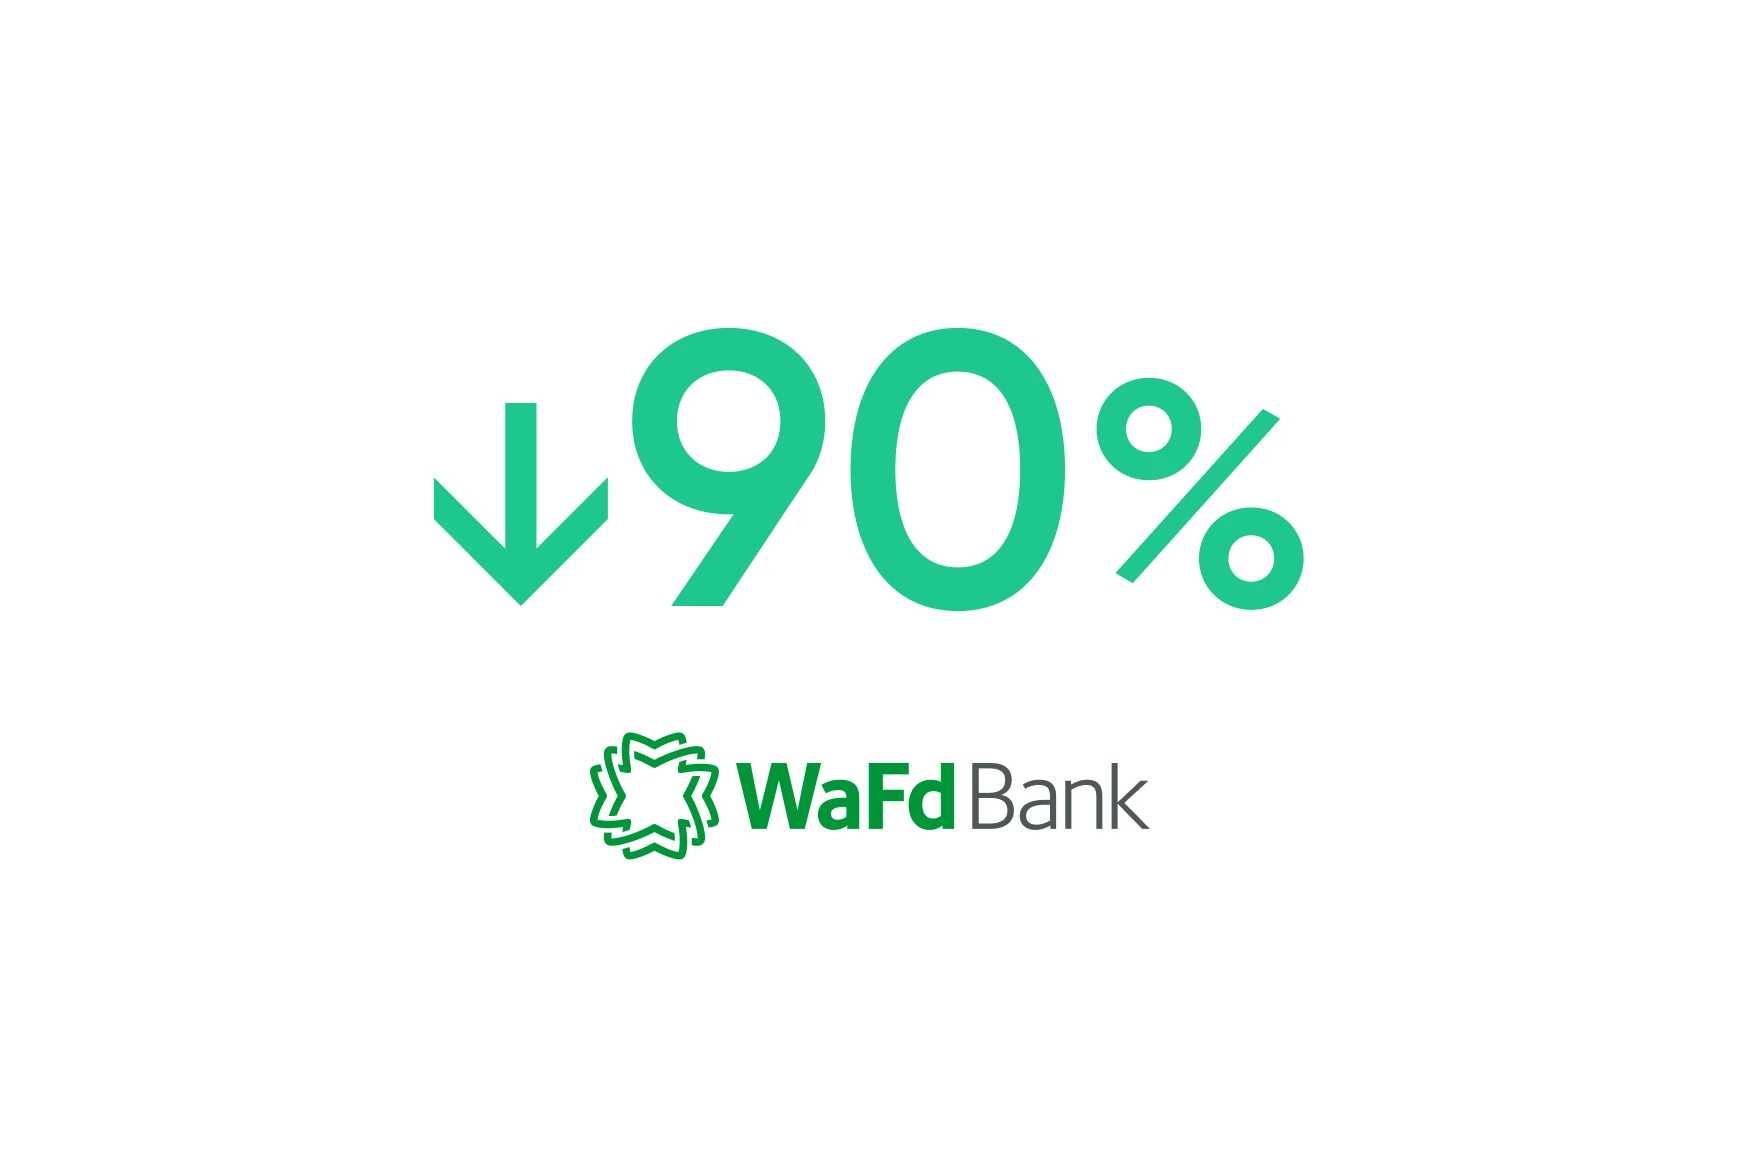 WaFd Bank: Conversational AI reduces check balance time by 90%